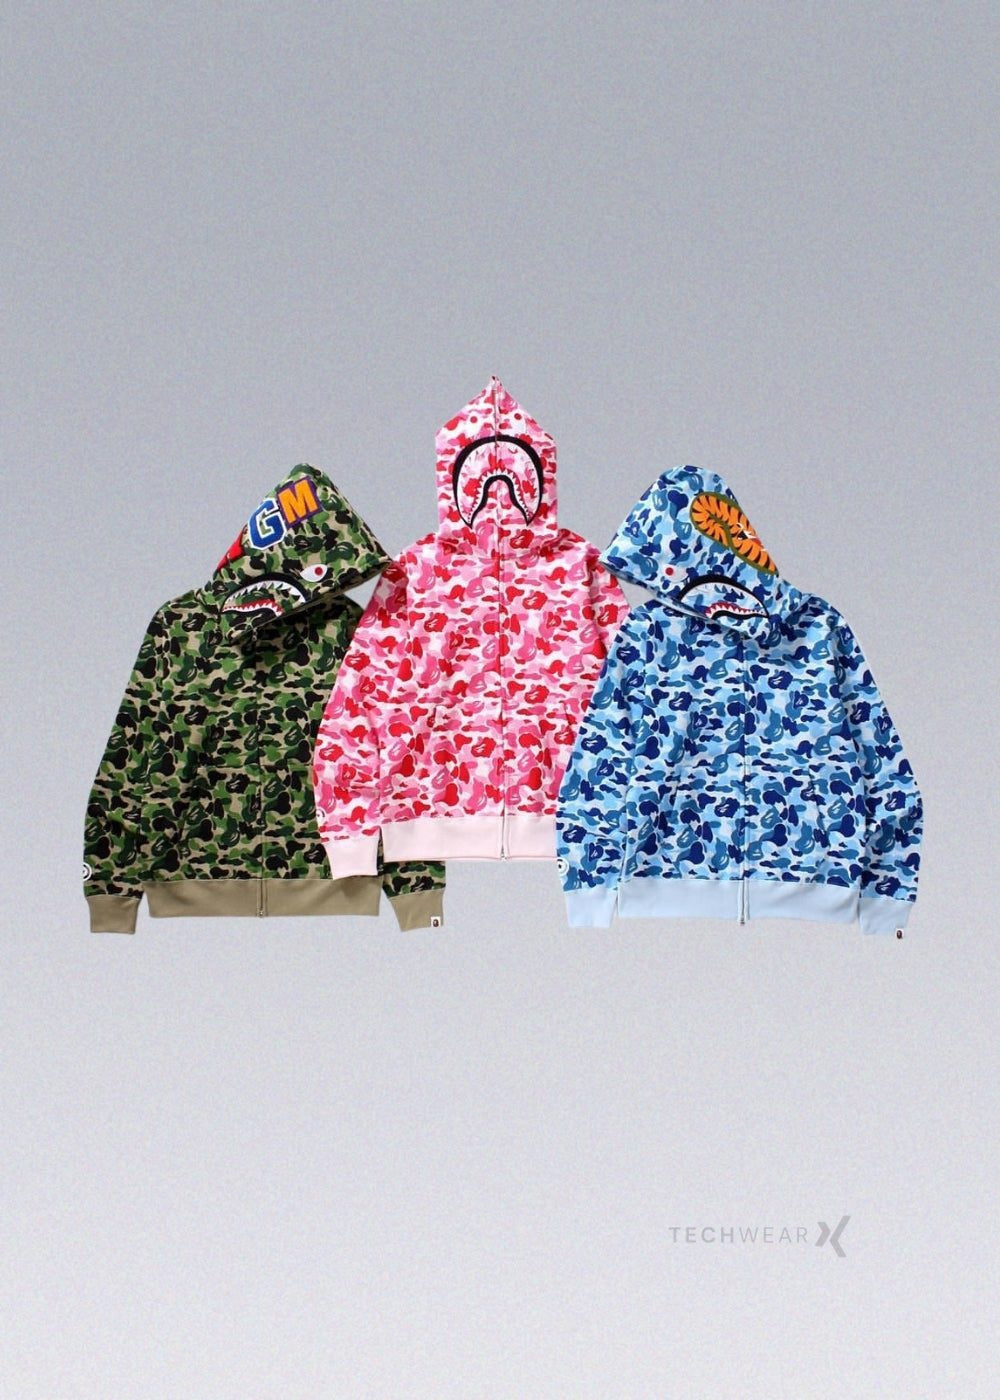 Bape Shark Hoodie Review  Is It Worth The Price?? + Sizing Tips! 